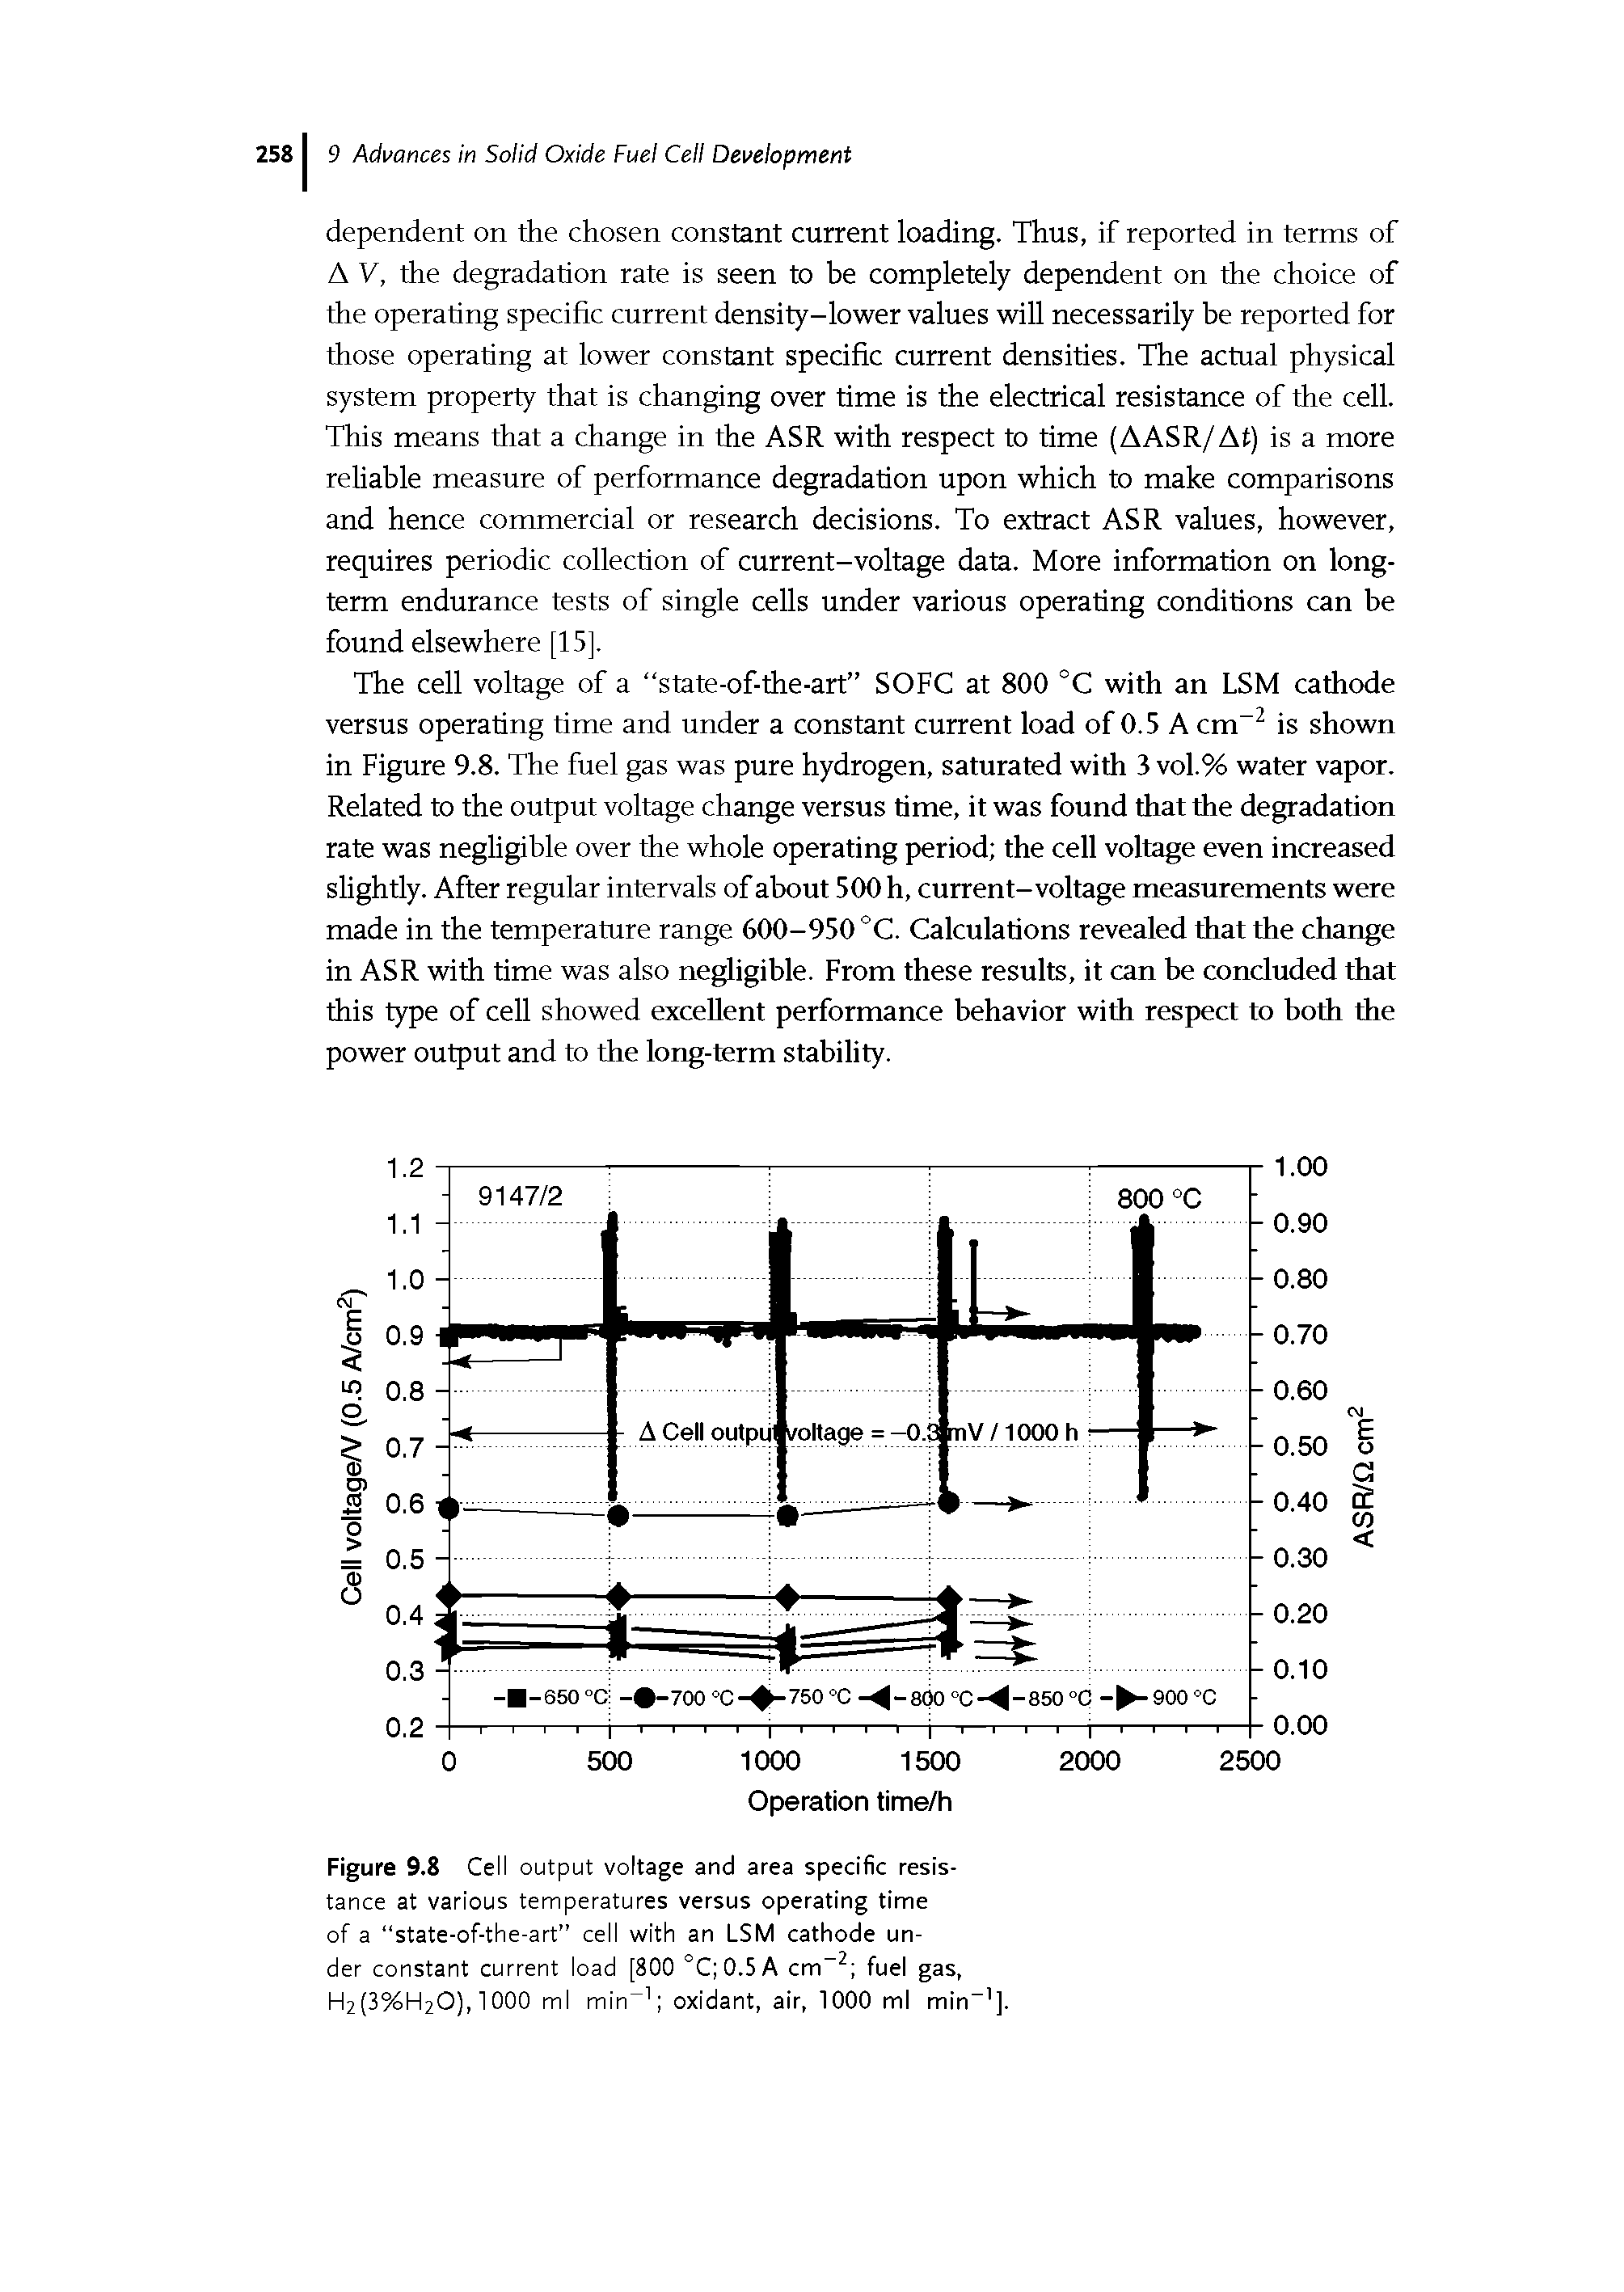 Figure 9.8 Cell output voltage and area specific resistance at various temperatures versus operating time of a state-of-the-art cell with an LSM cathode under constant current load [800 °C 0.5A cm fuel gas, H2(3%l-l20), 1000 ml min oxidant, air, 1000 ml min ].